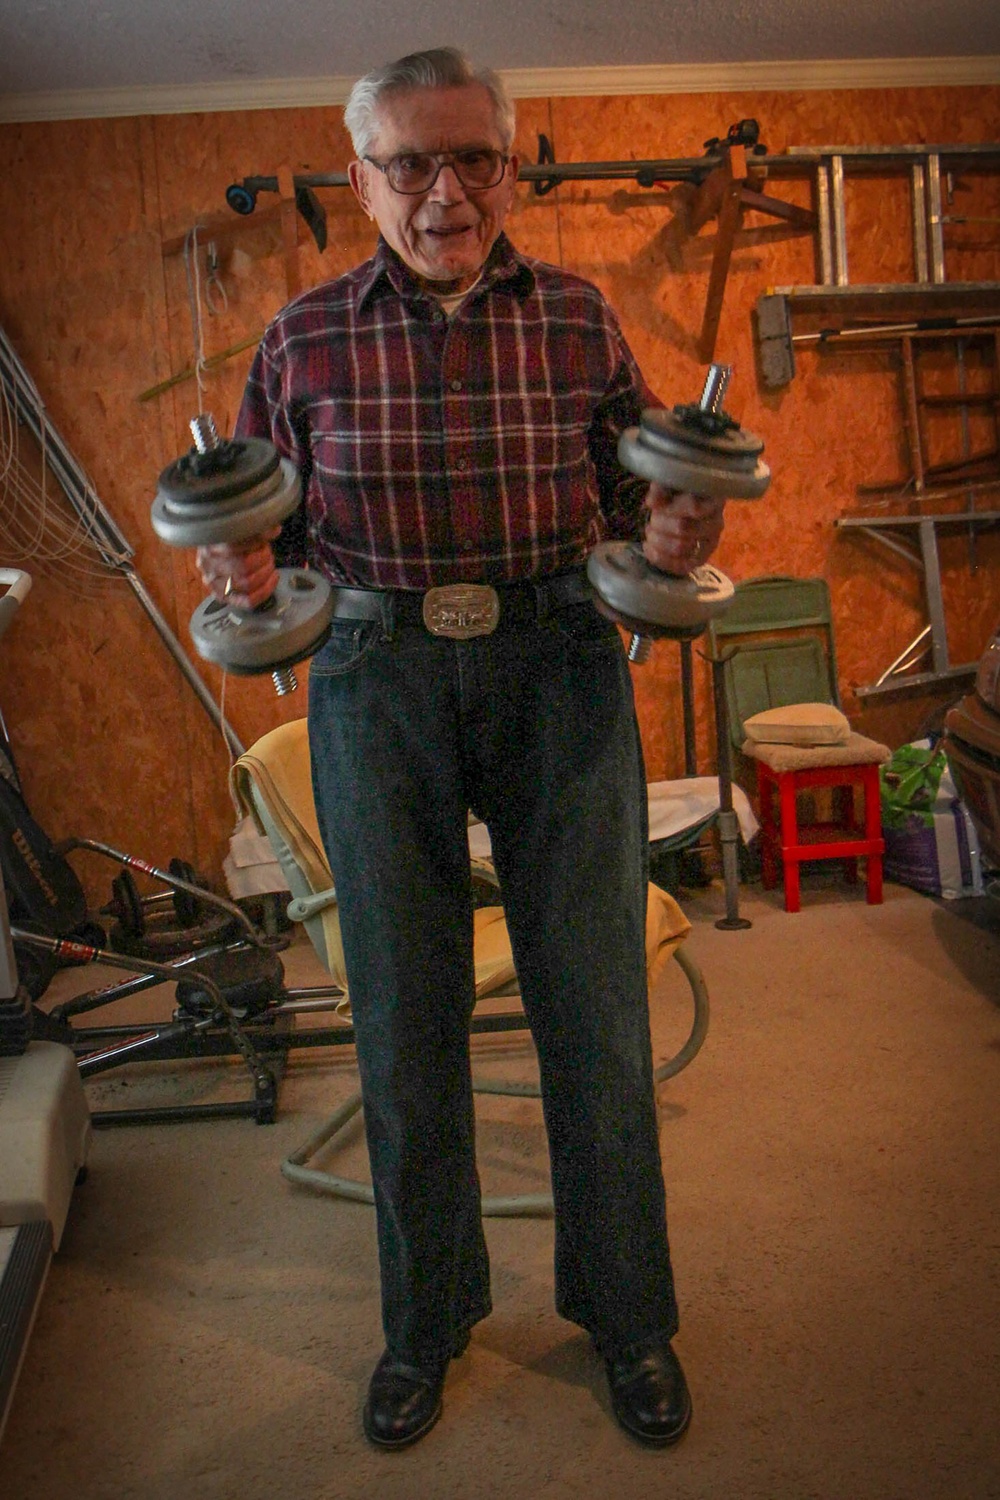 95 year-old WWII vet does curls in his garage